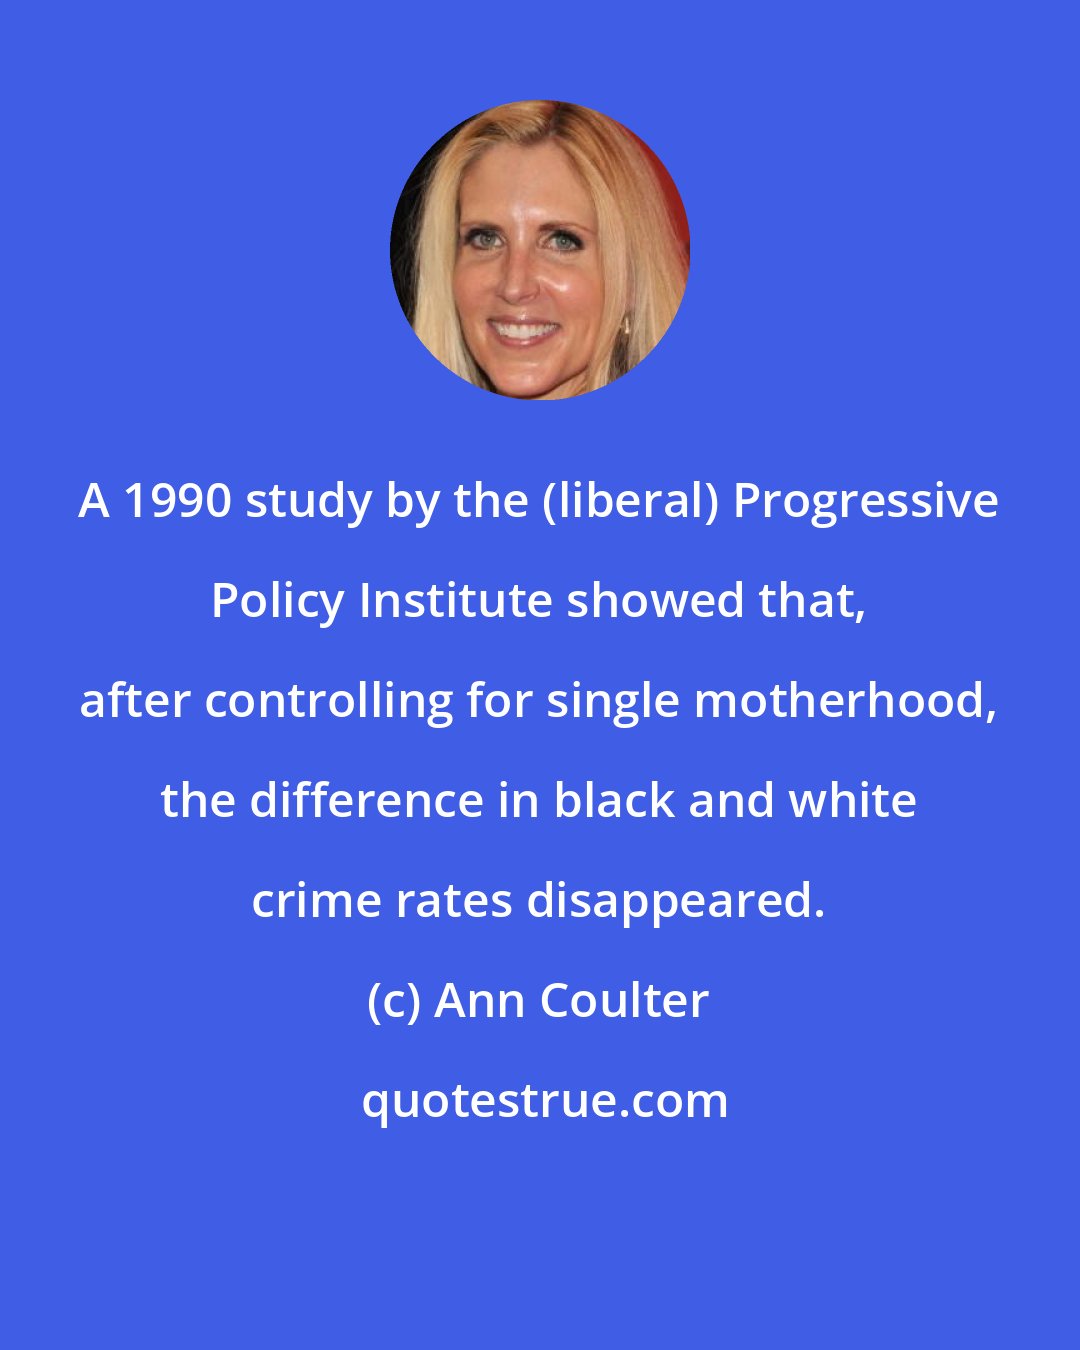 Ann Coulter: A 1990 study by the (liberal) Progressive Policy Institute showed that, after controlling for single motherhood, the difference in black and white crime rates disappeared.